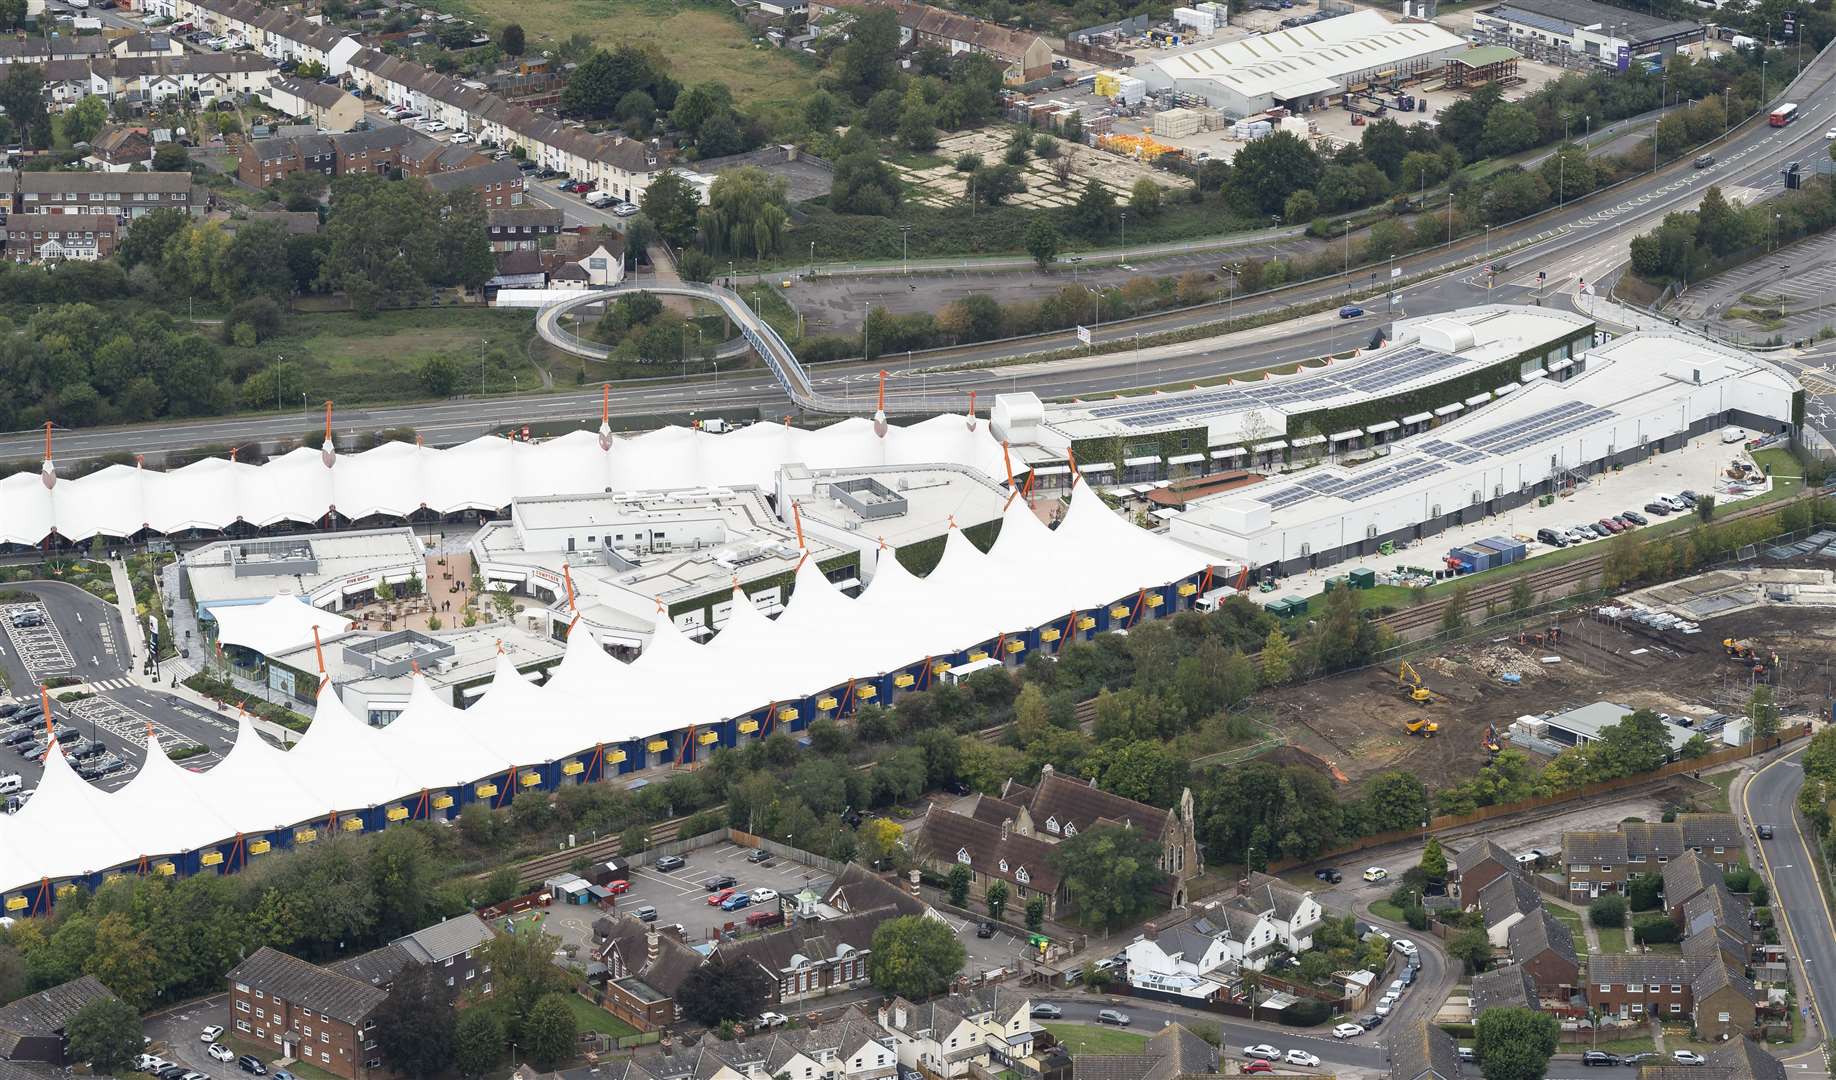 The Ashford Designer Outlet would have formed a key part of the monorail route. Picture: Ady Kerry/Ashford Borough Council